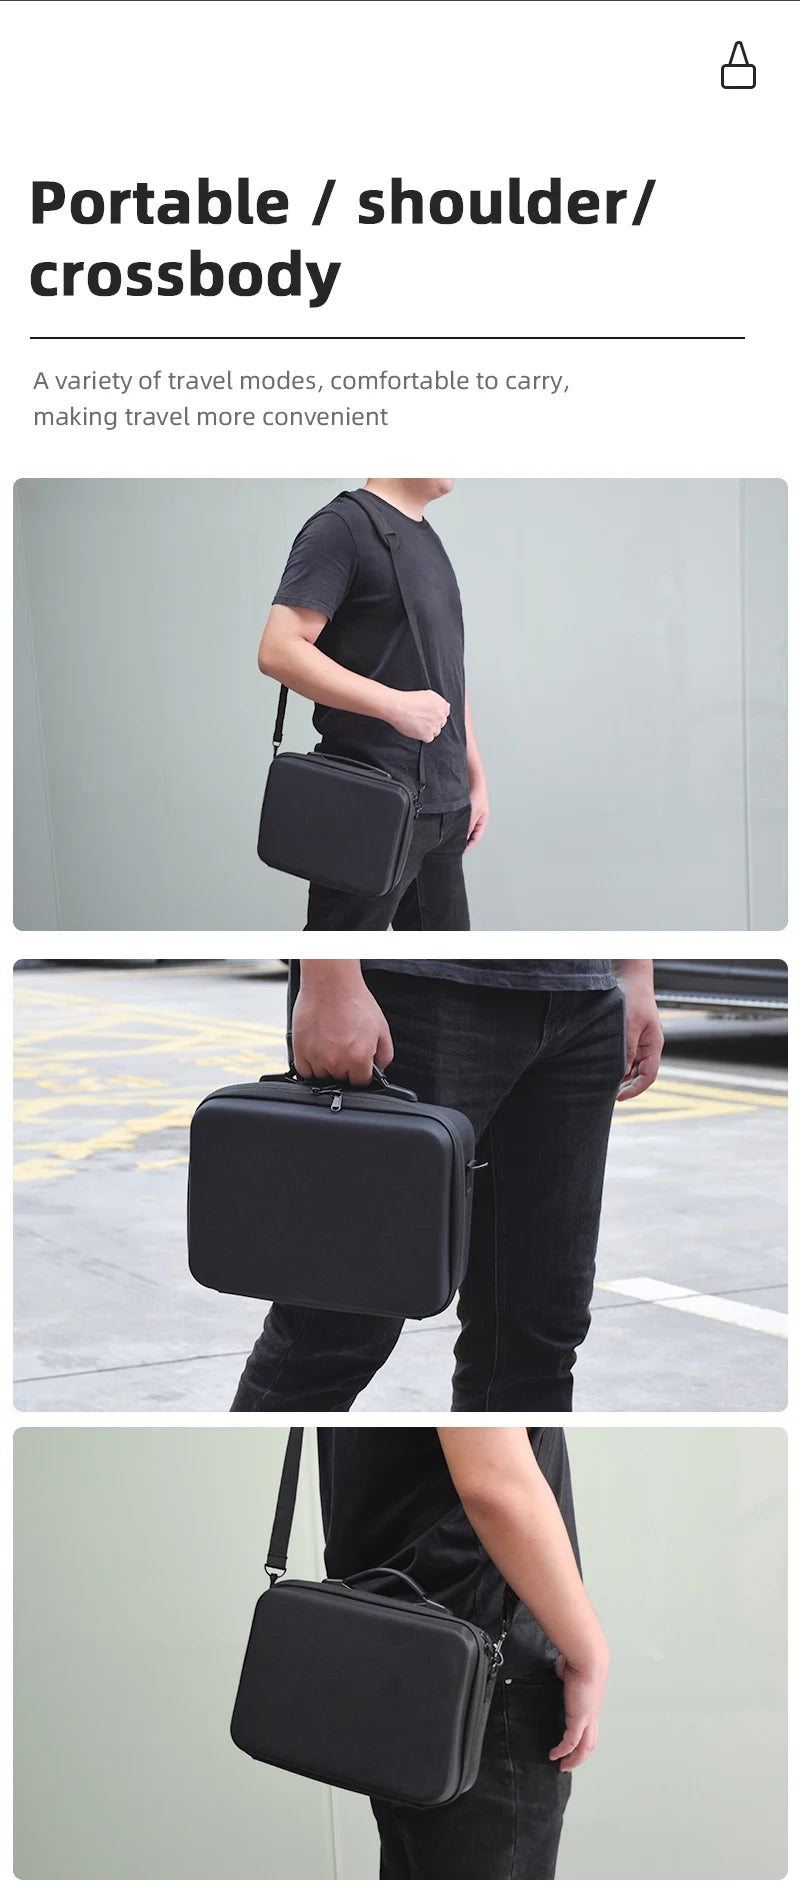 Storage Case Portable Suitcase For DJI Mini 3 Pro, portable / shoulder/ crossbody A variety of travel modes, making travel more convenient .